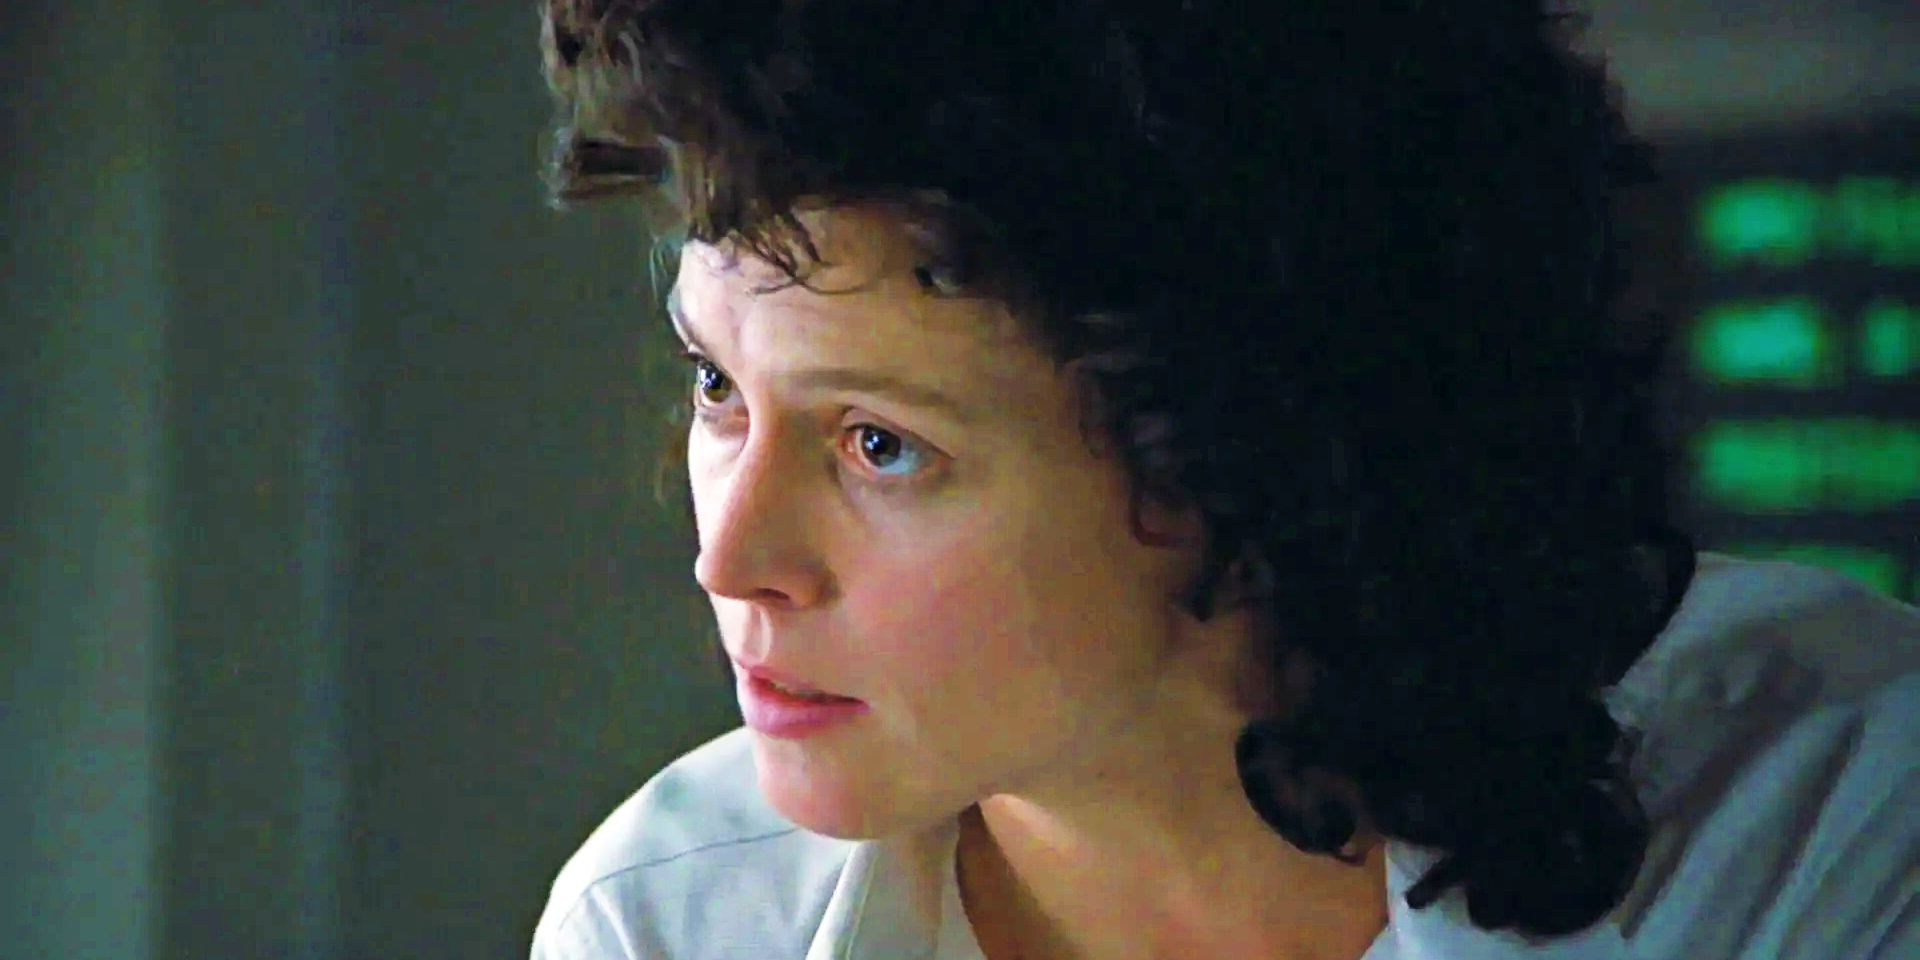 Sigourney Weaver as Ellen Ripley speaking intensely in Aliens directed by James Cameron